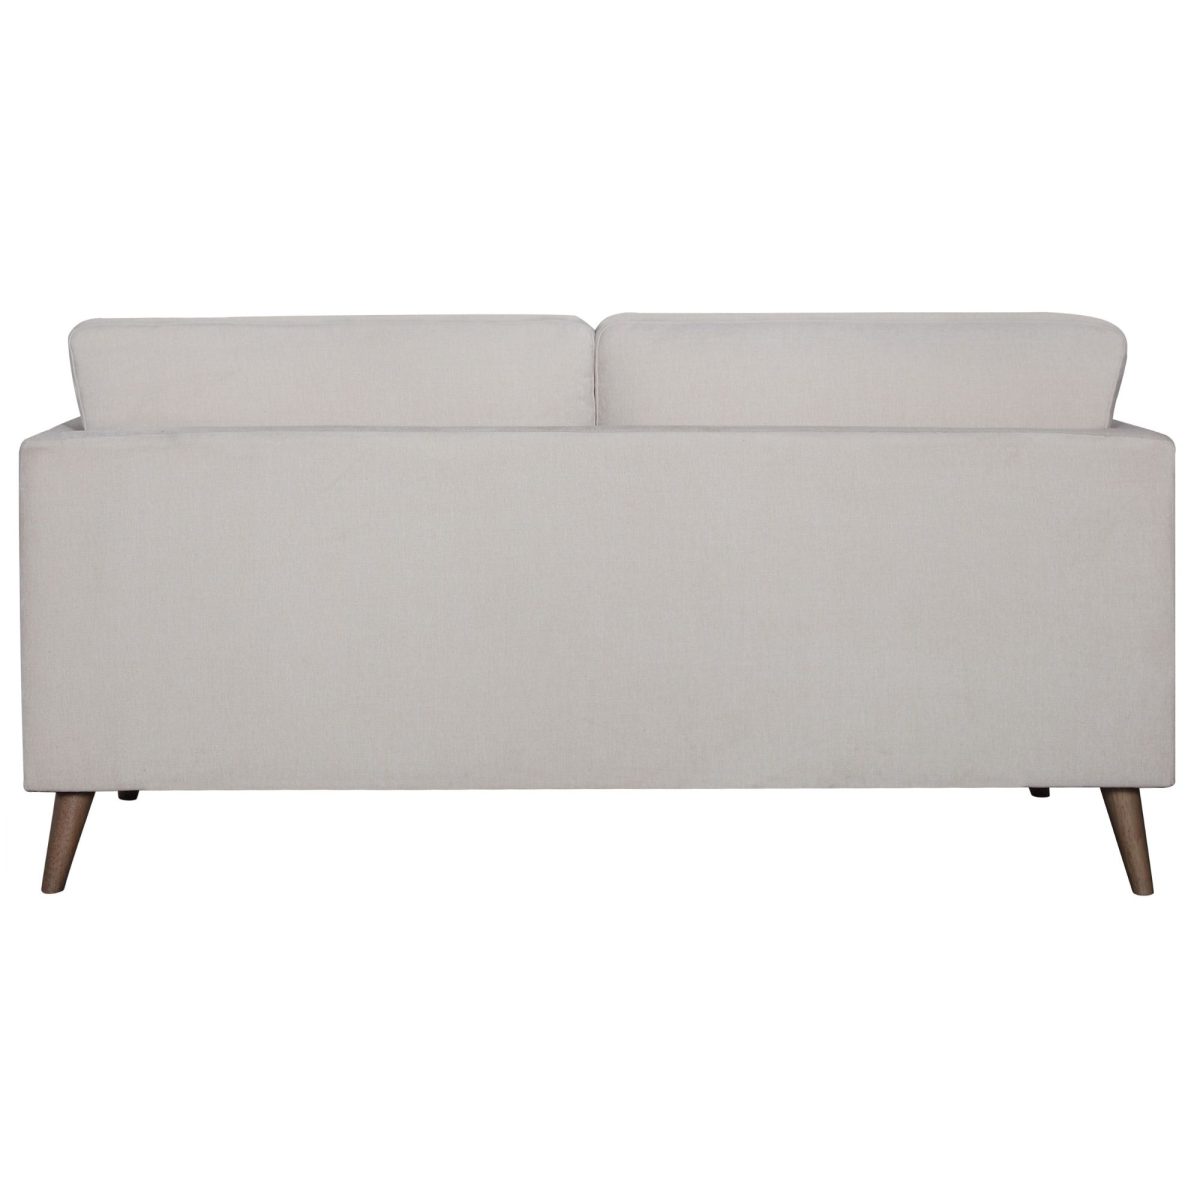 Nooa Sofa Fabric Uplholstered Lounge Couch – Stone – 2 Seater